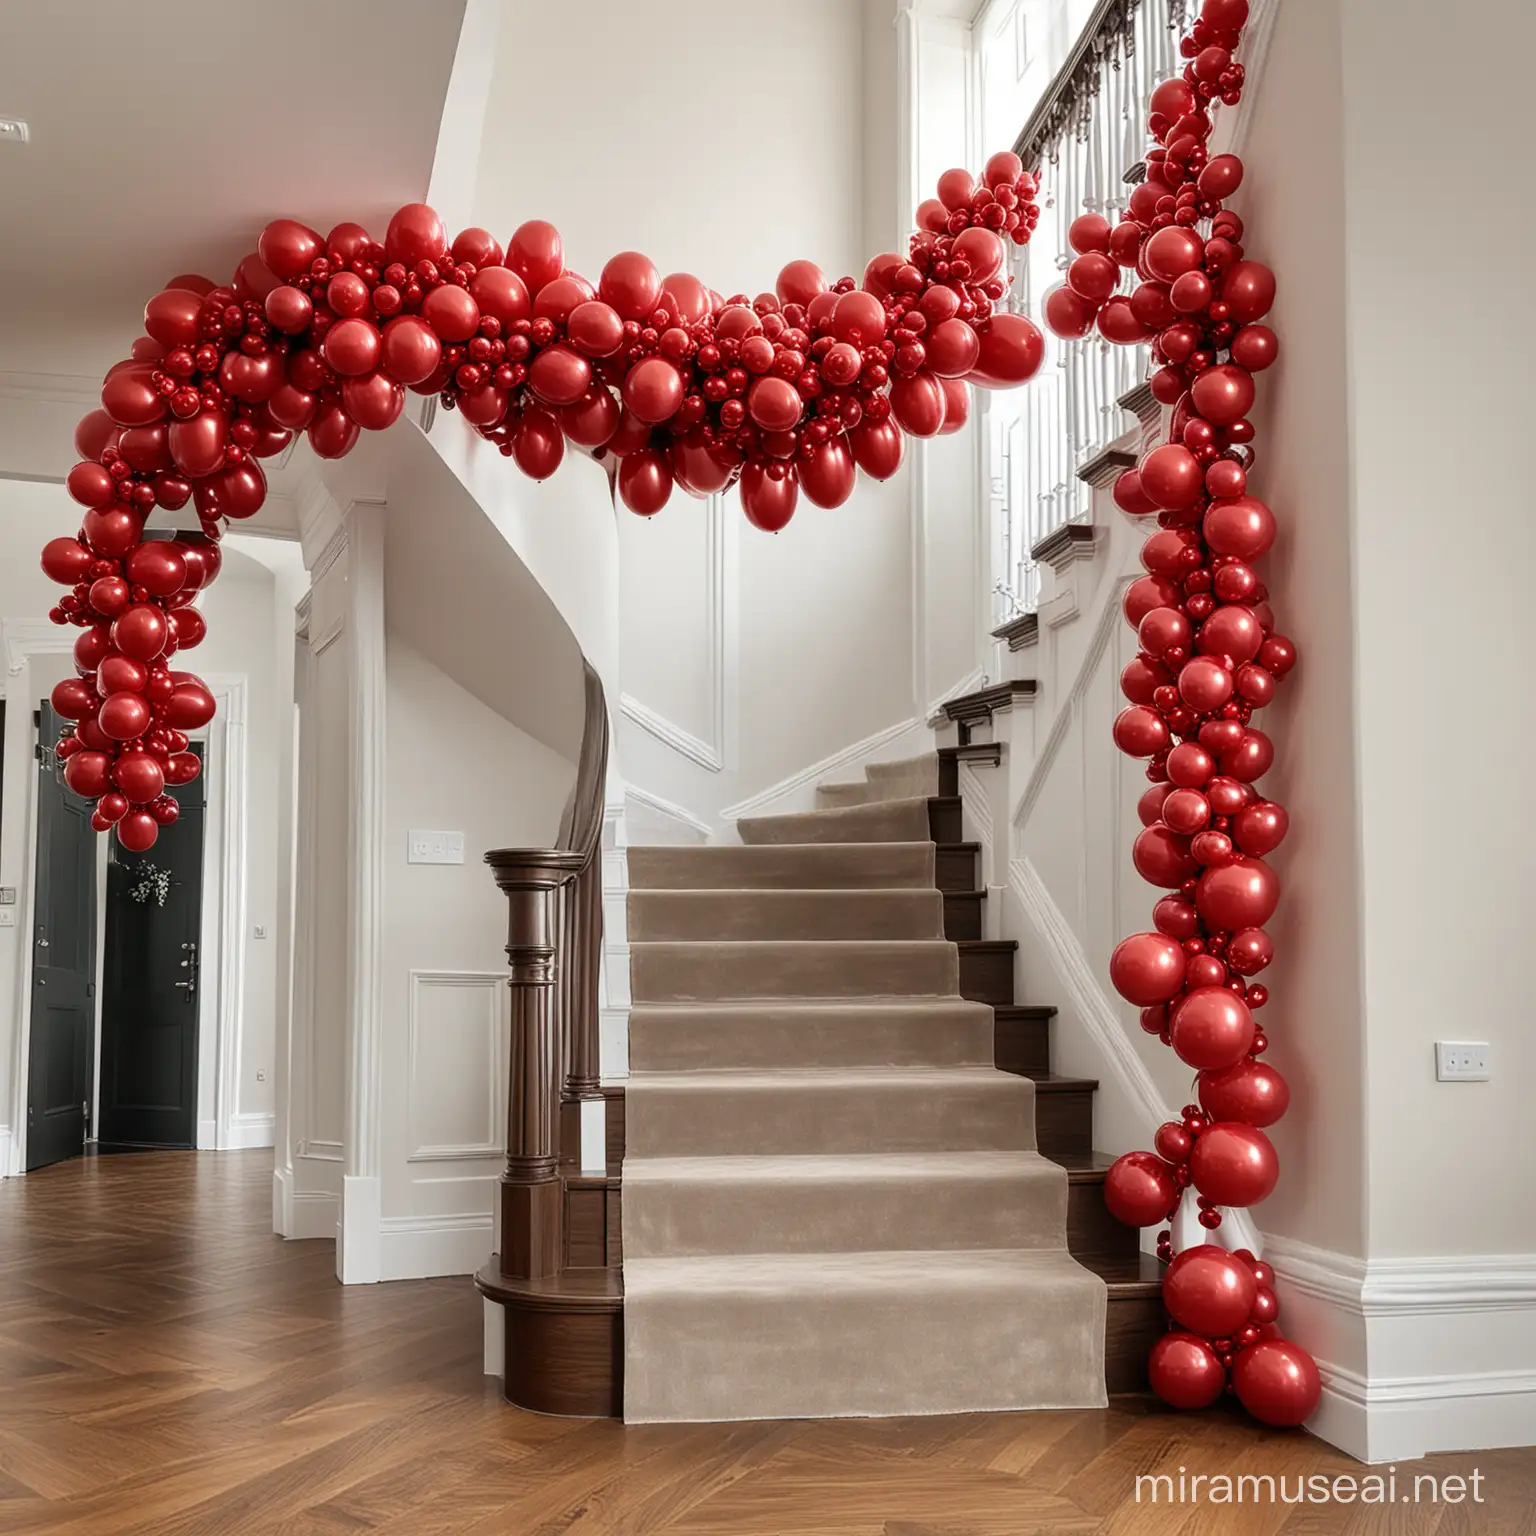 Luxurious Red Balloon Garland with Rose Accents Adorning Staircase